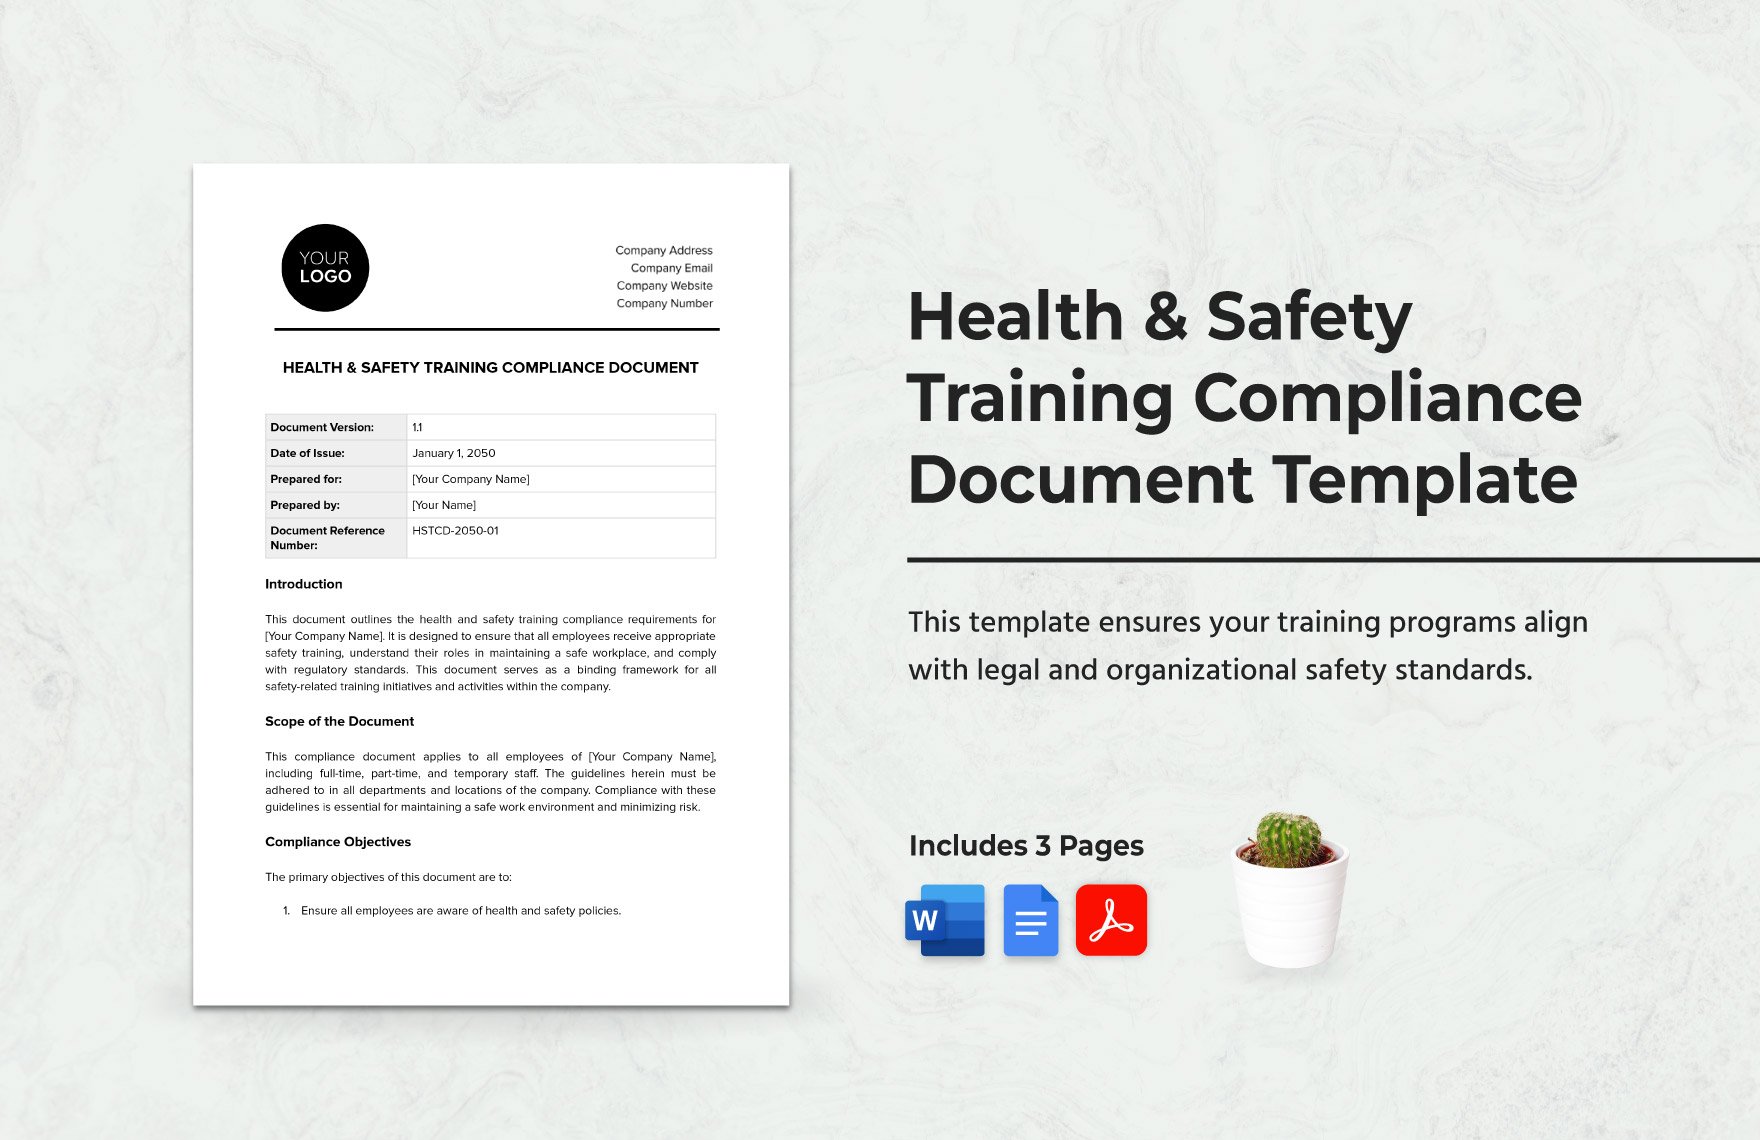 Health & Safety Training Compliance Document Template in Word, Google Docs, PDF